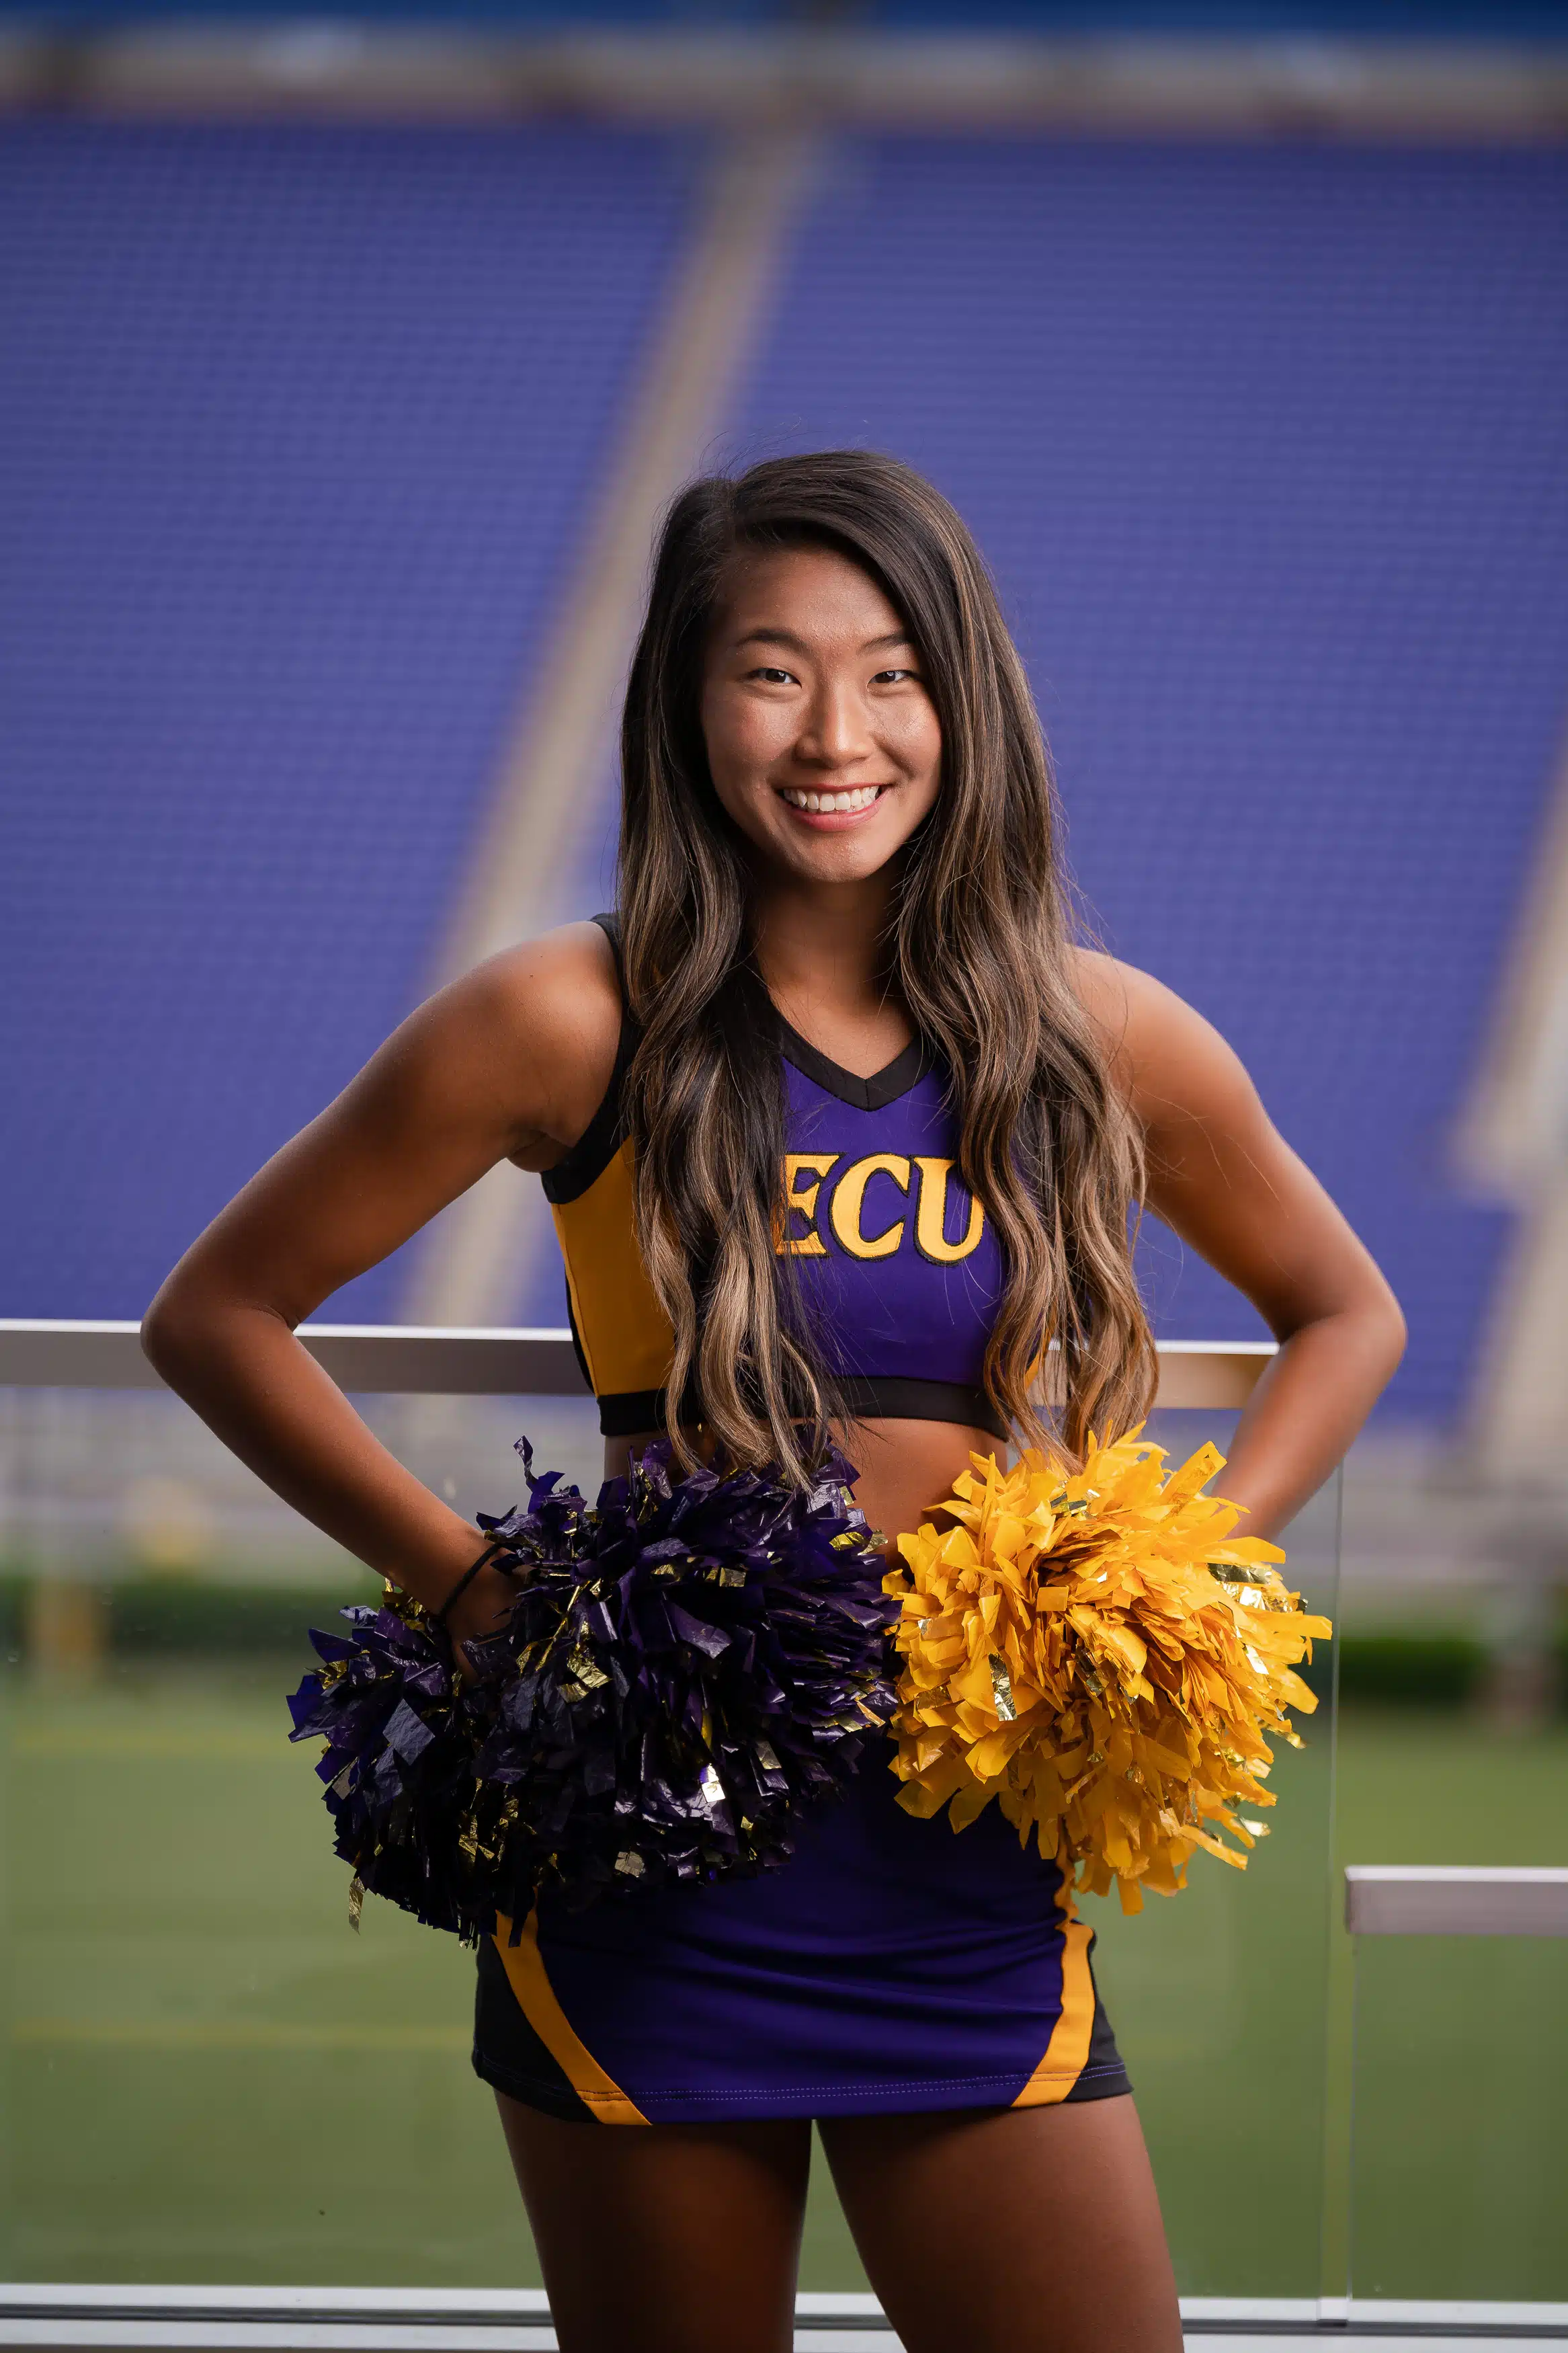 ECU cheerleader posing at dowdy-ficklen stadium for a headshot while wearing a purple and gold cheerleading outfit